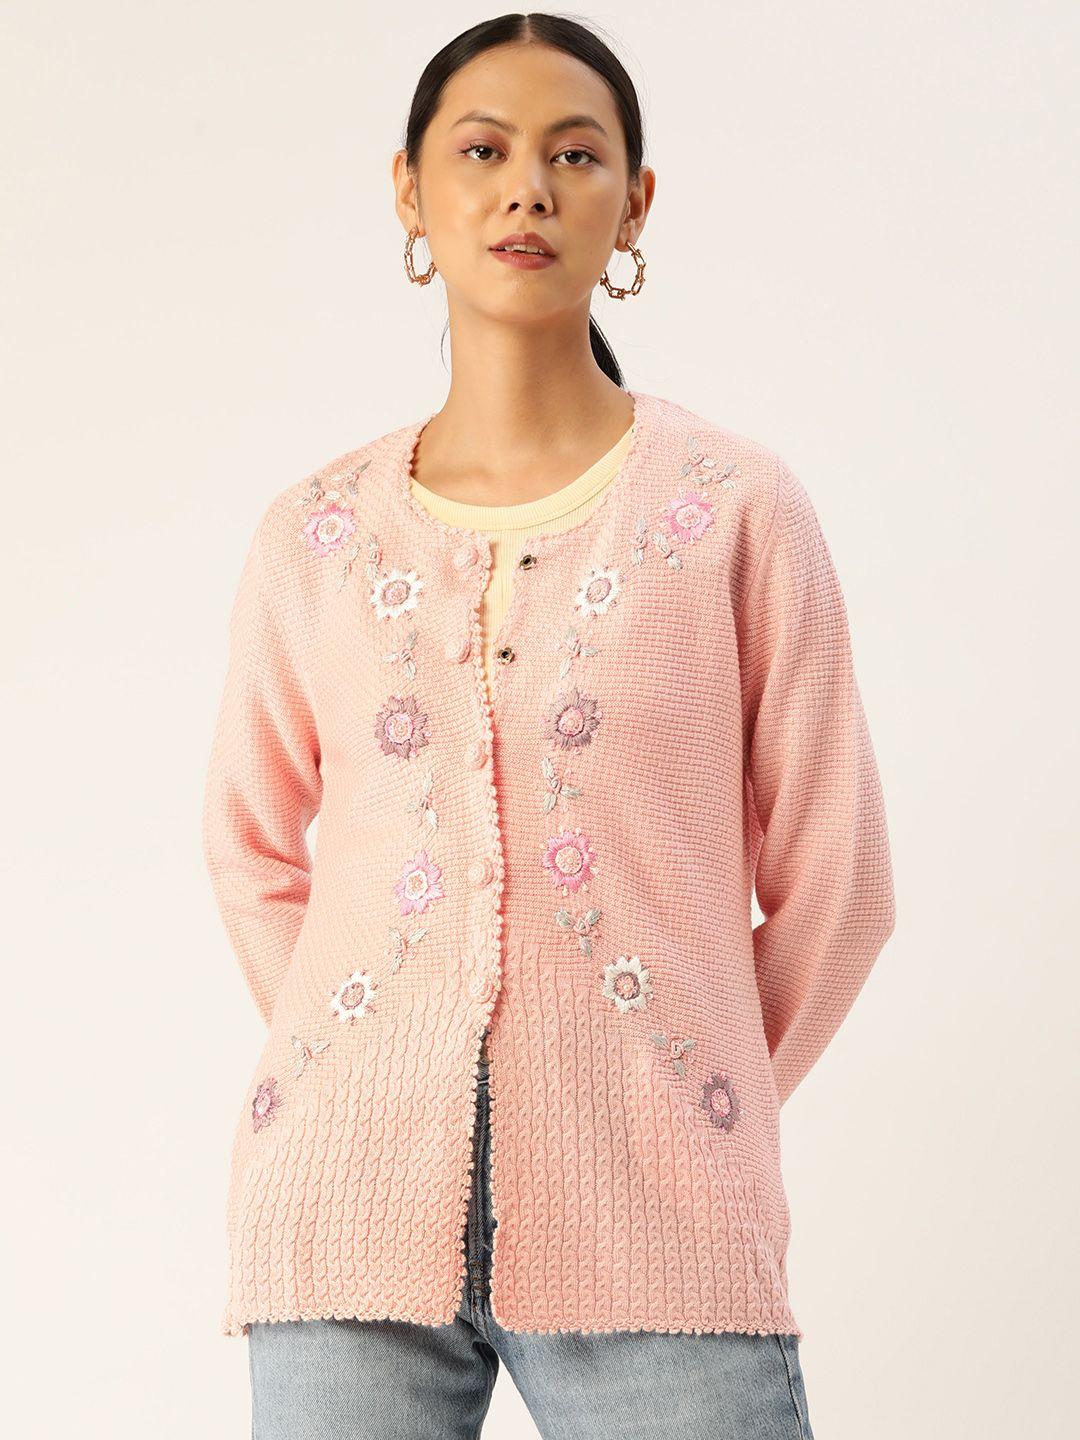 apsley-women-pink-floral-embroidered-cardigan